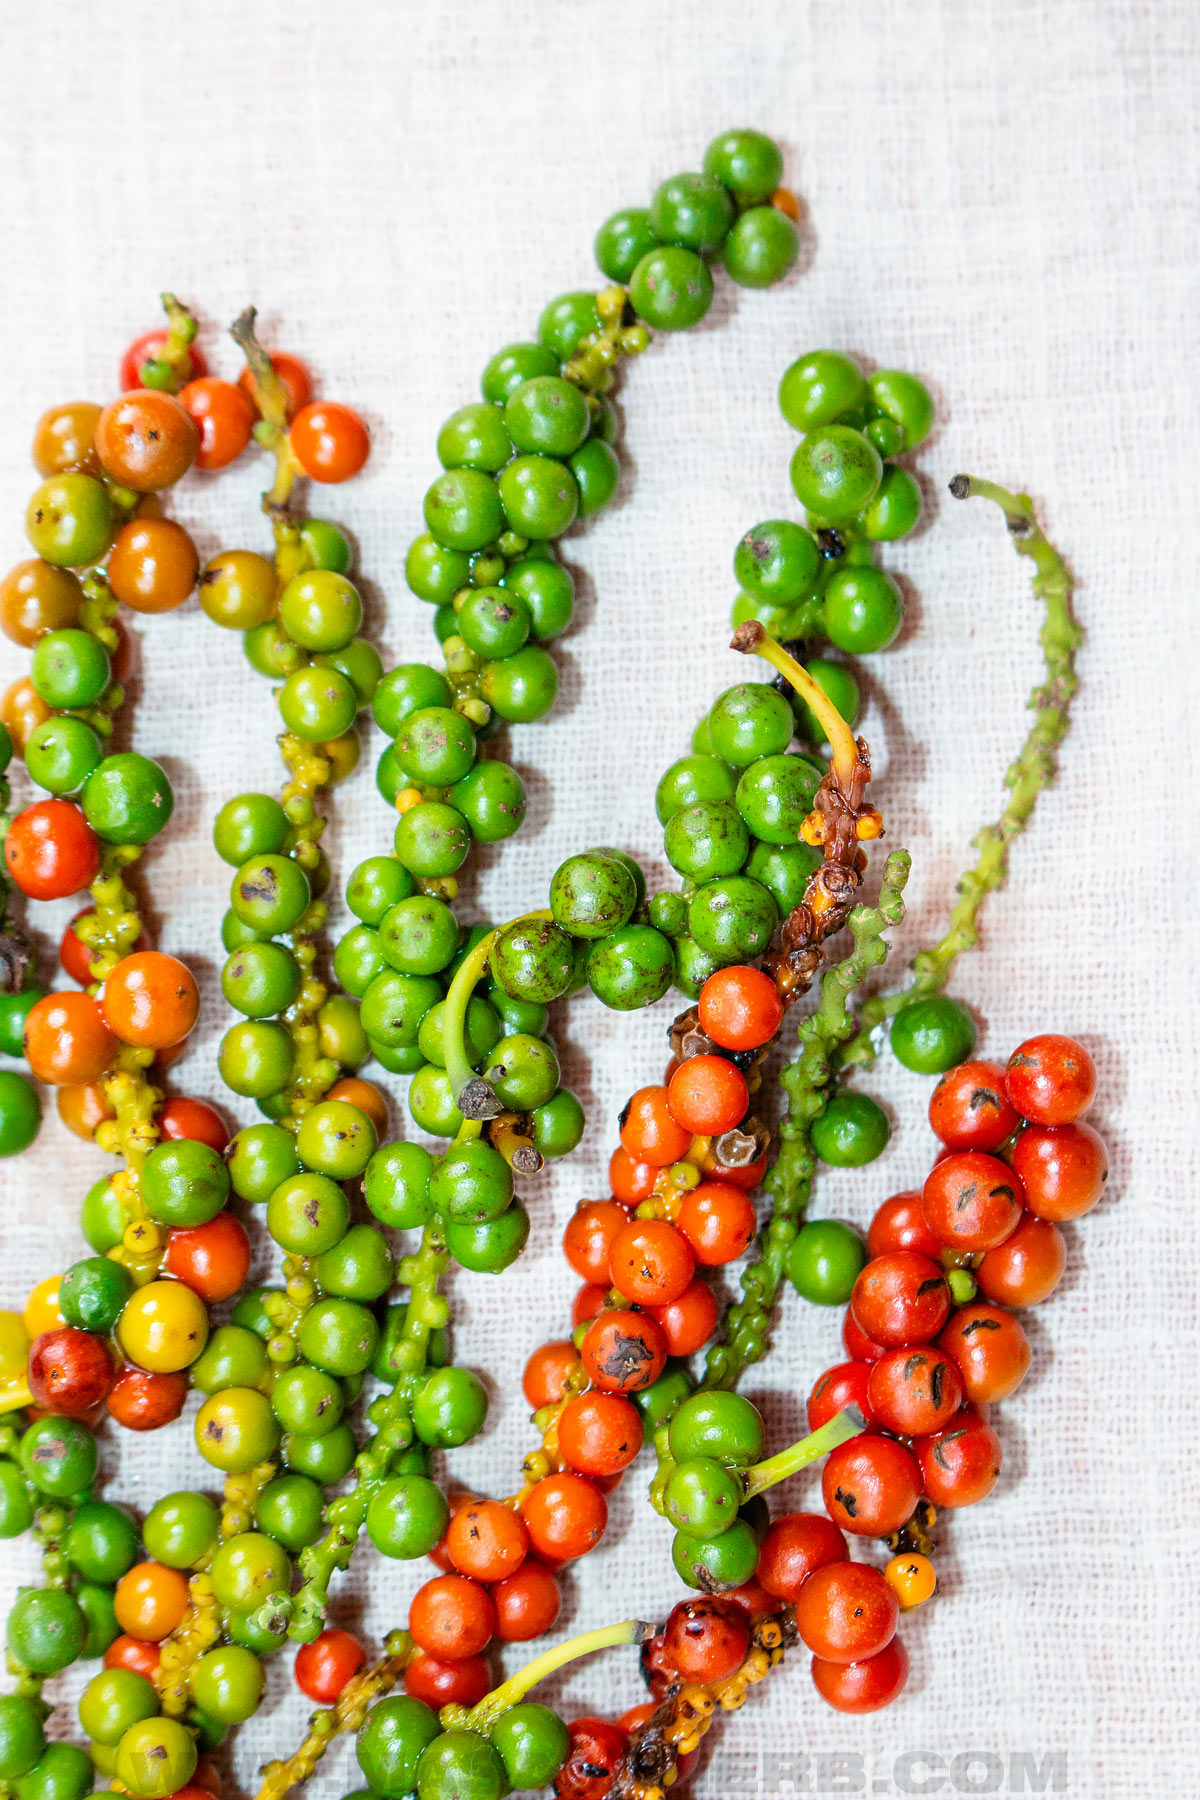 Green Peppercorn drupes with some ripened red ones